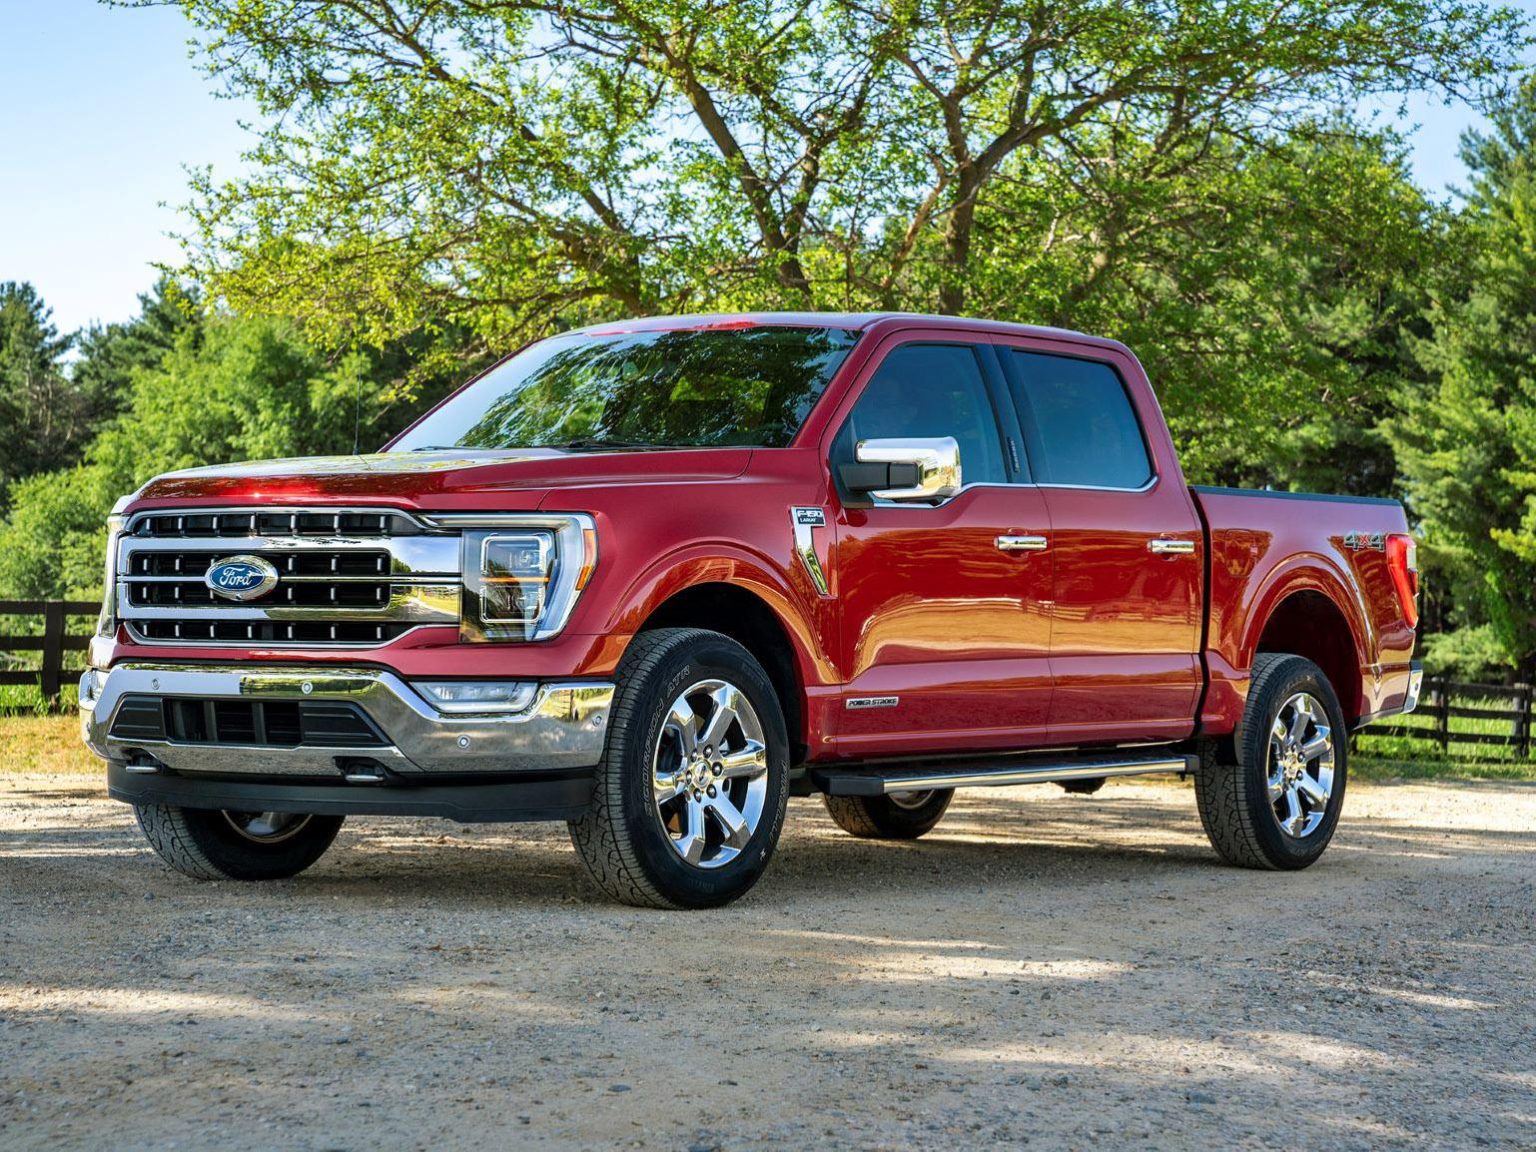 The 2021 Ford F-150 is arriving at dealerships this winter.